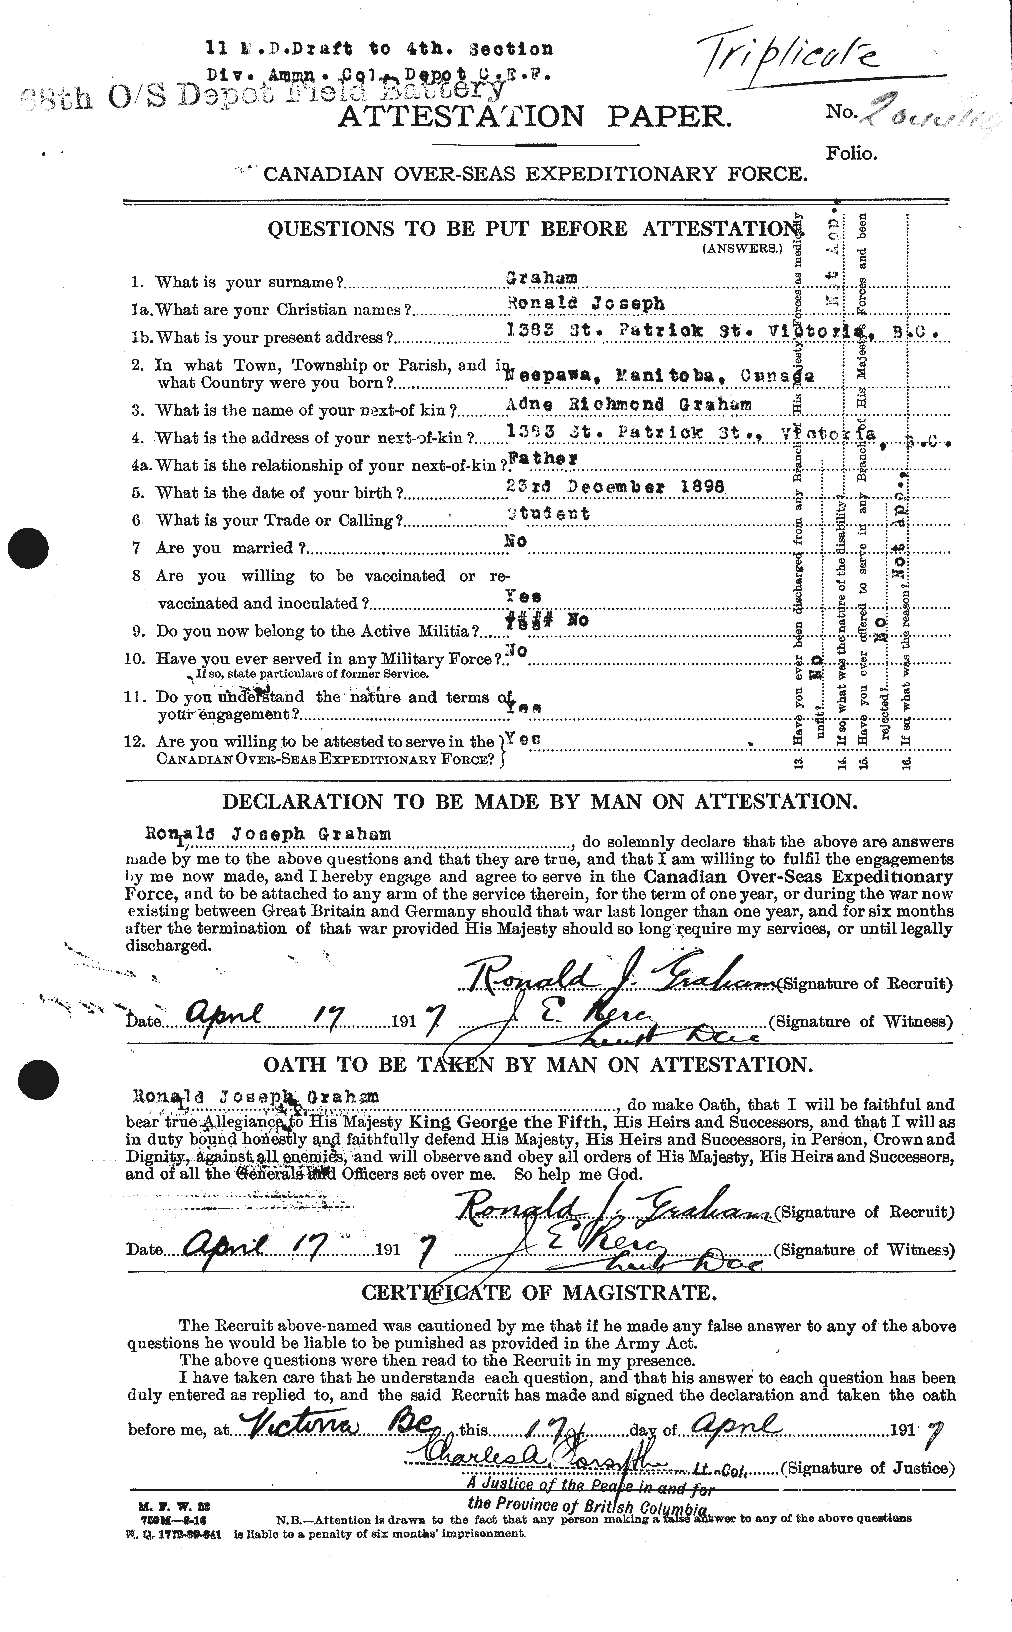 Personnel Records of the First World War - CEF 359431a